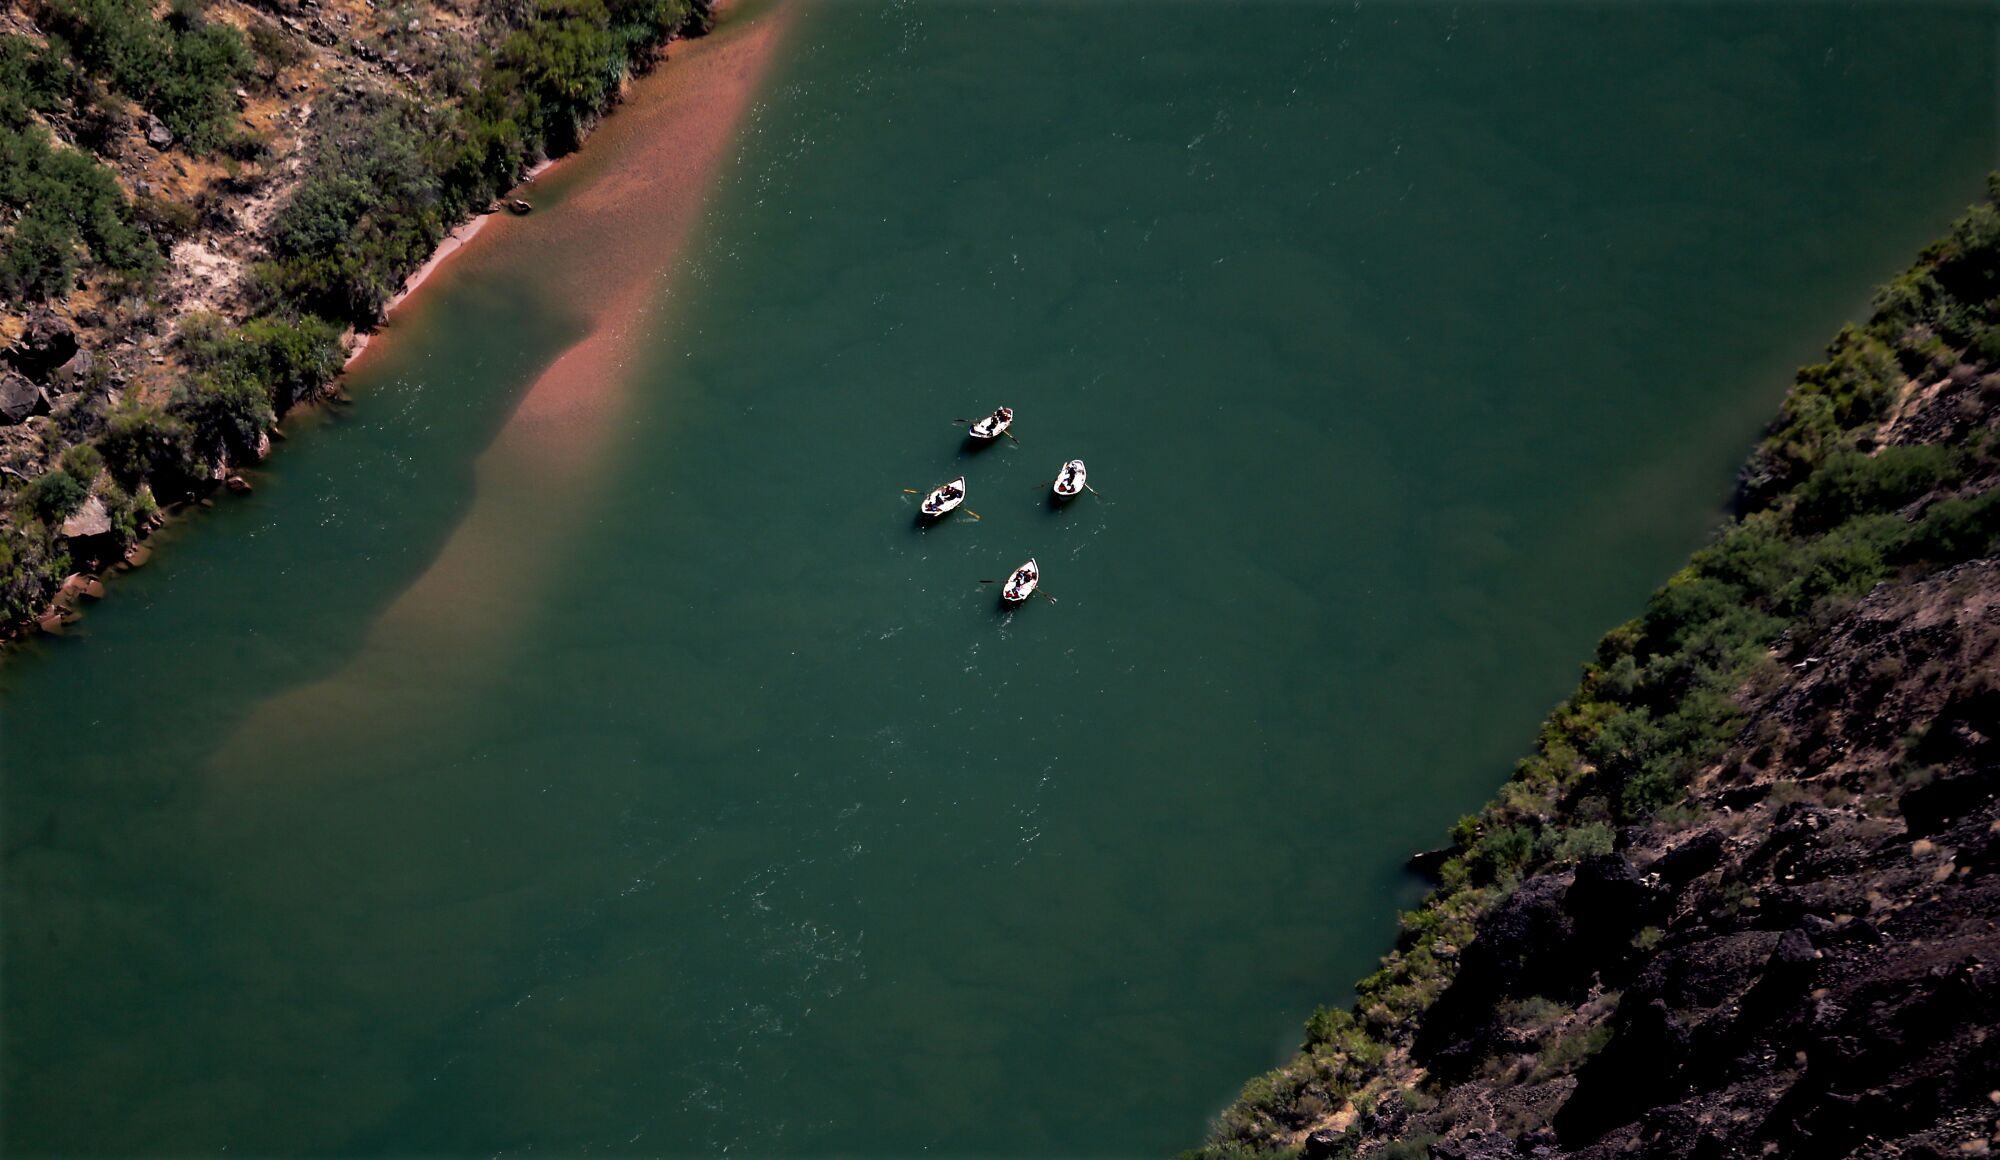 Whitewater river rafters on the Colorado River as seen from Toroweap Overlook on the north rim of the Grand Canyon.